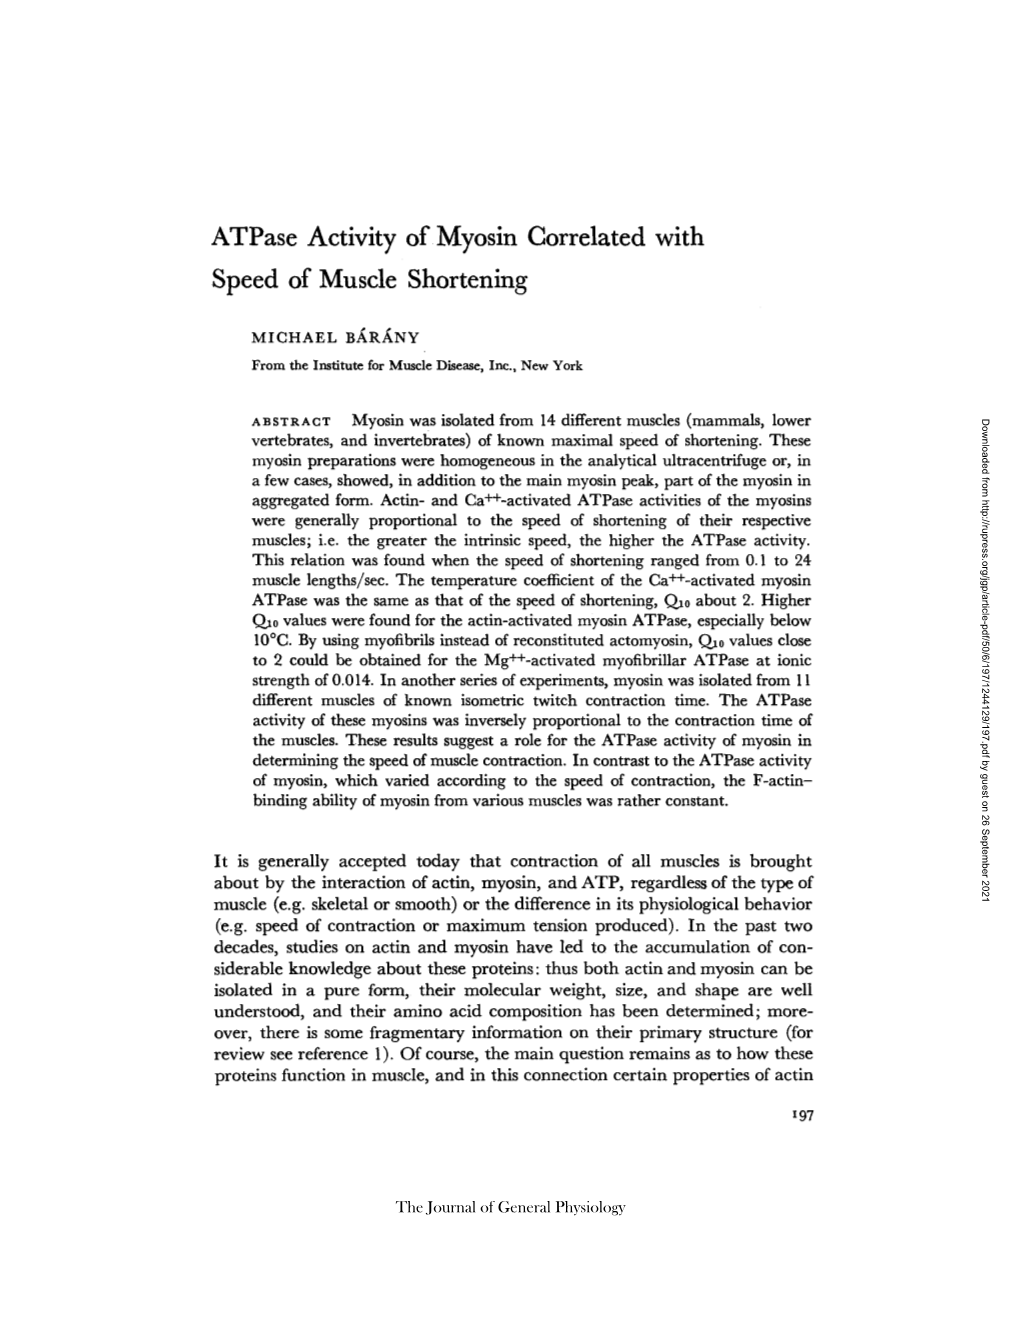 Atpase Activity of Myosin Correlated with Speed of Muscle Shortening